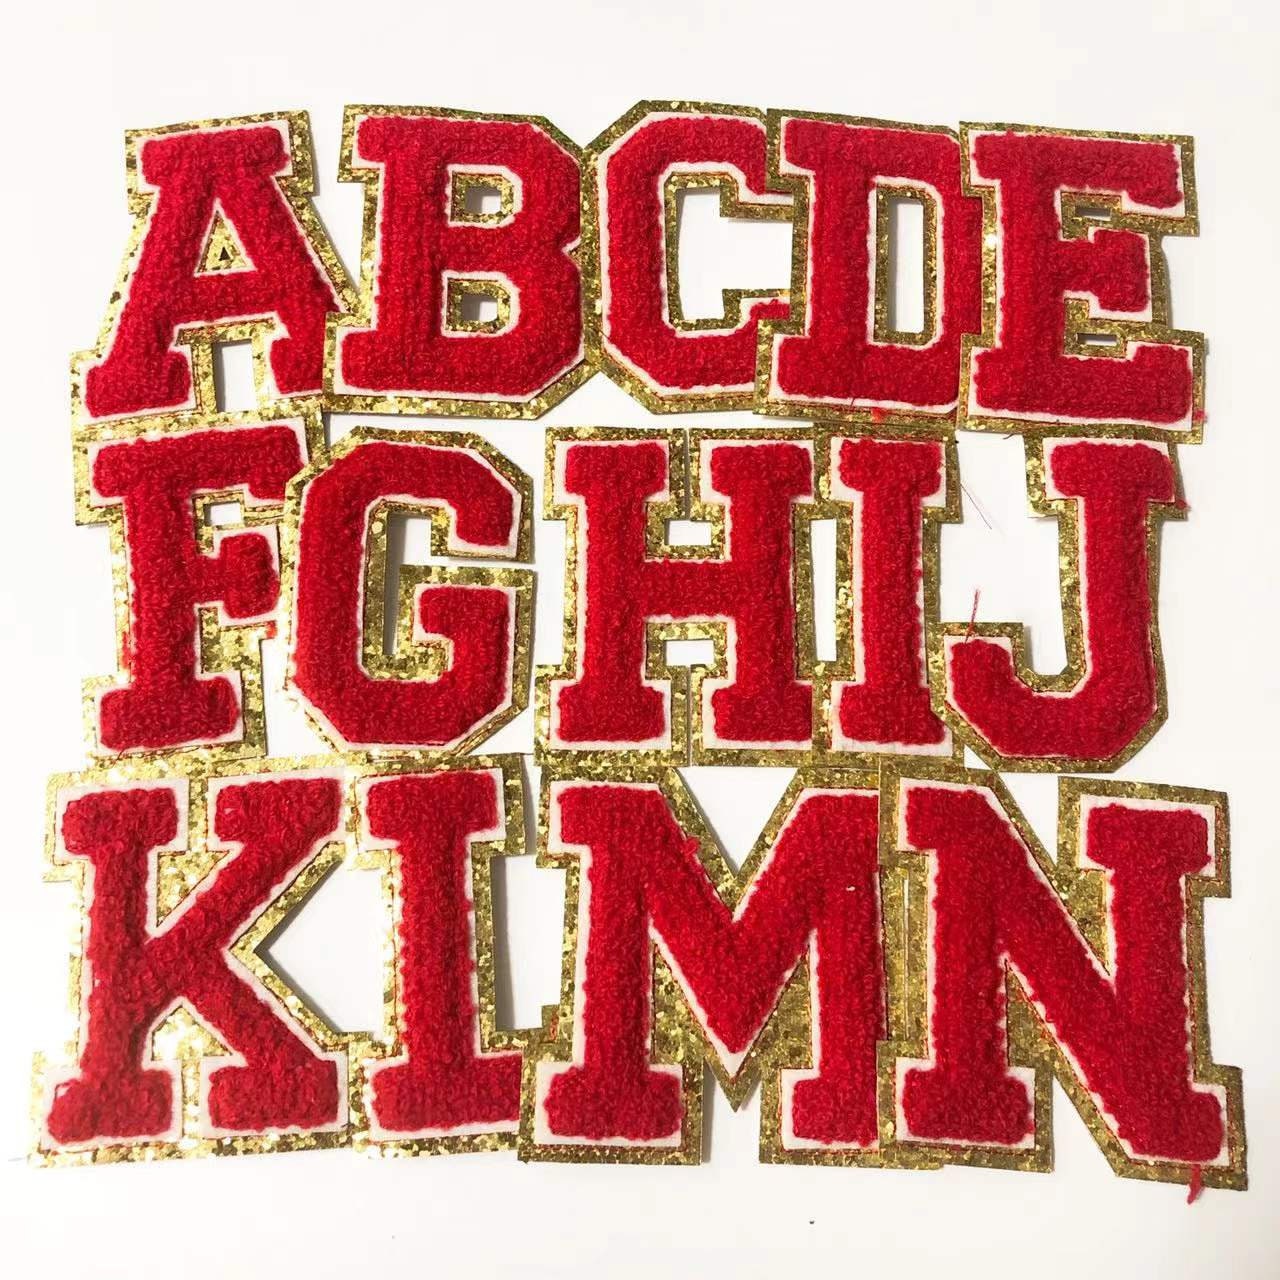 3-inch-tall Iron on Rhinestone Greek Letters Can Make Your 